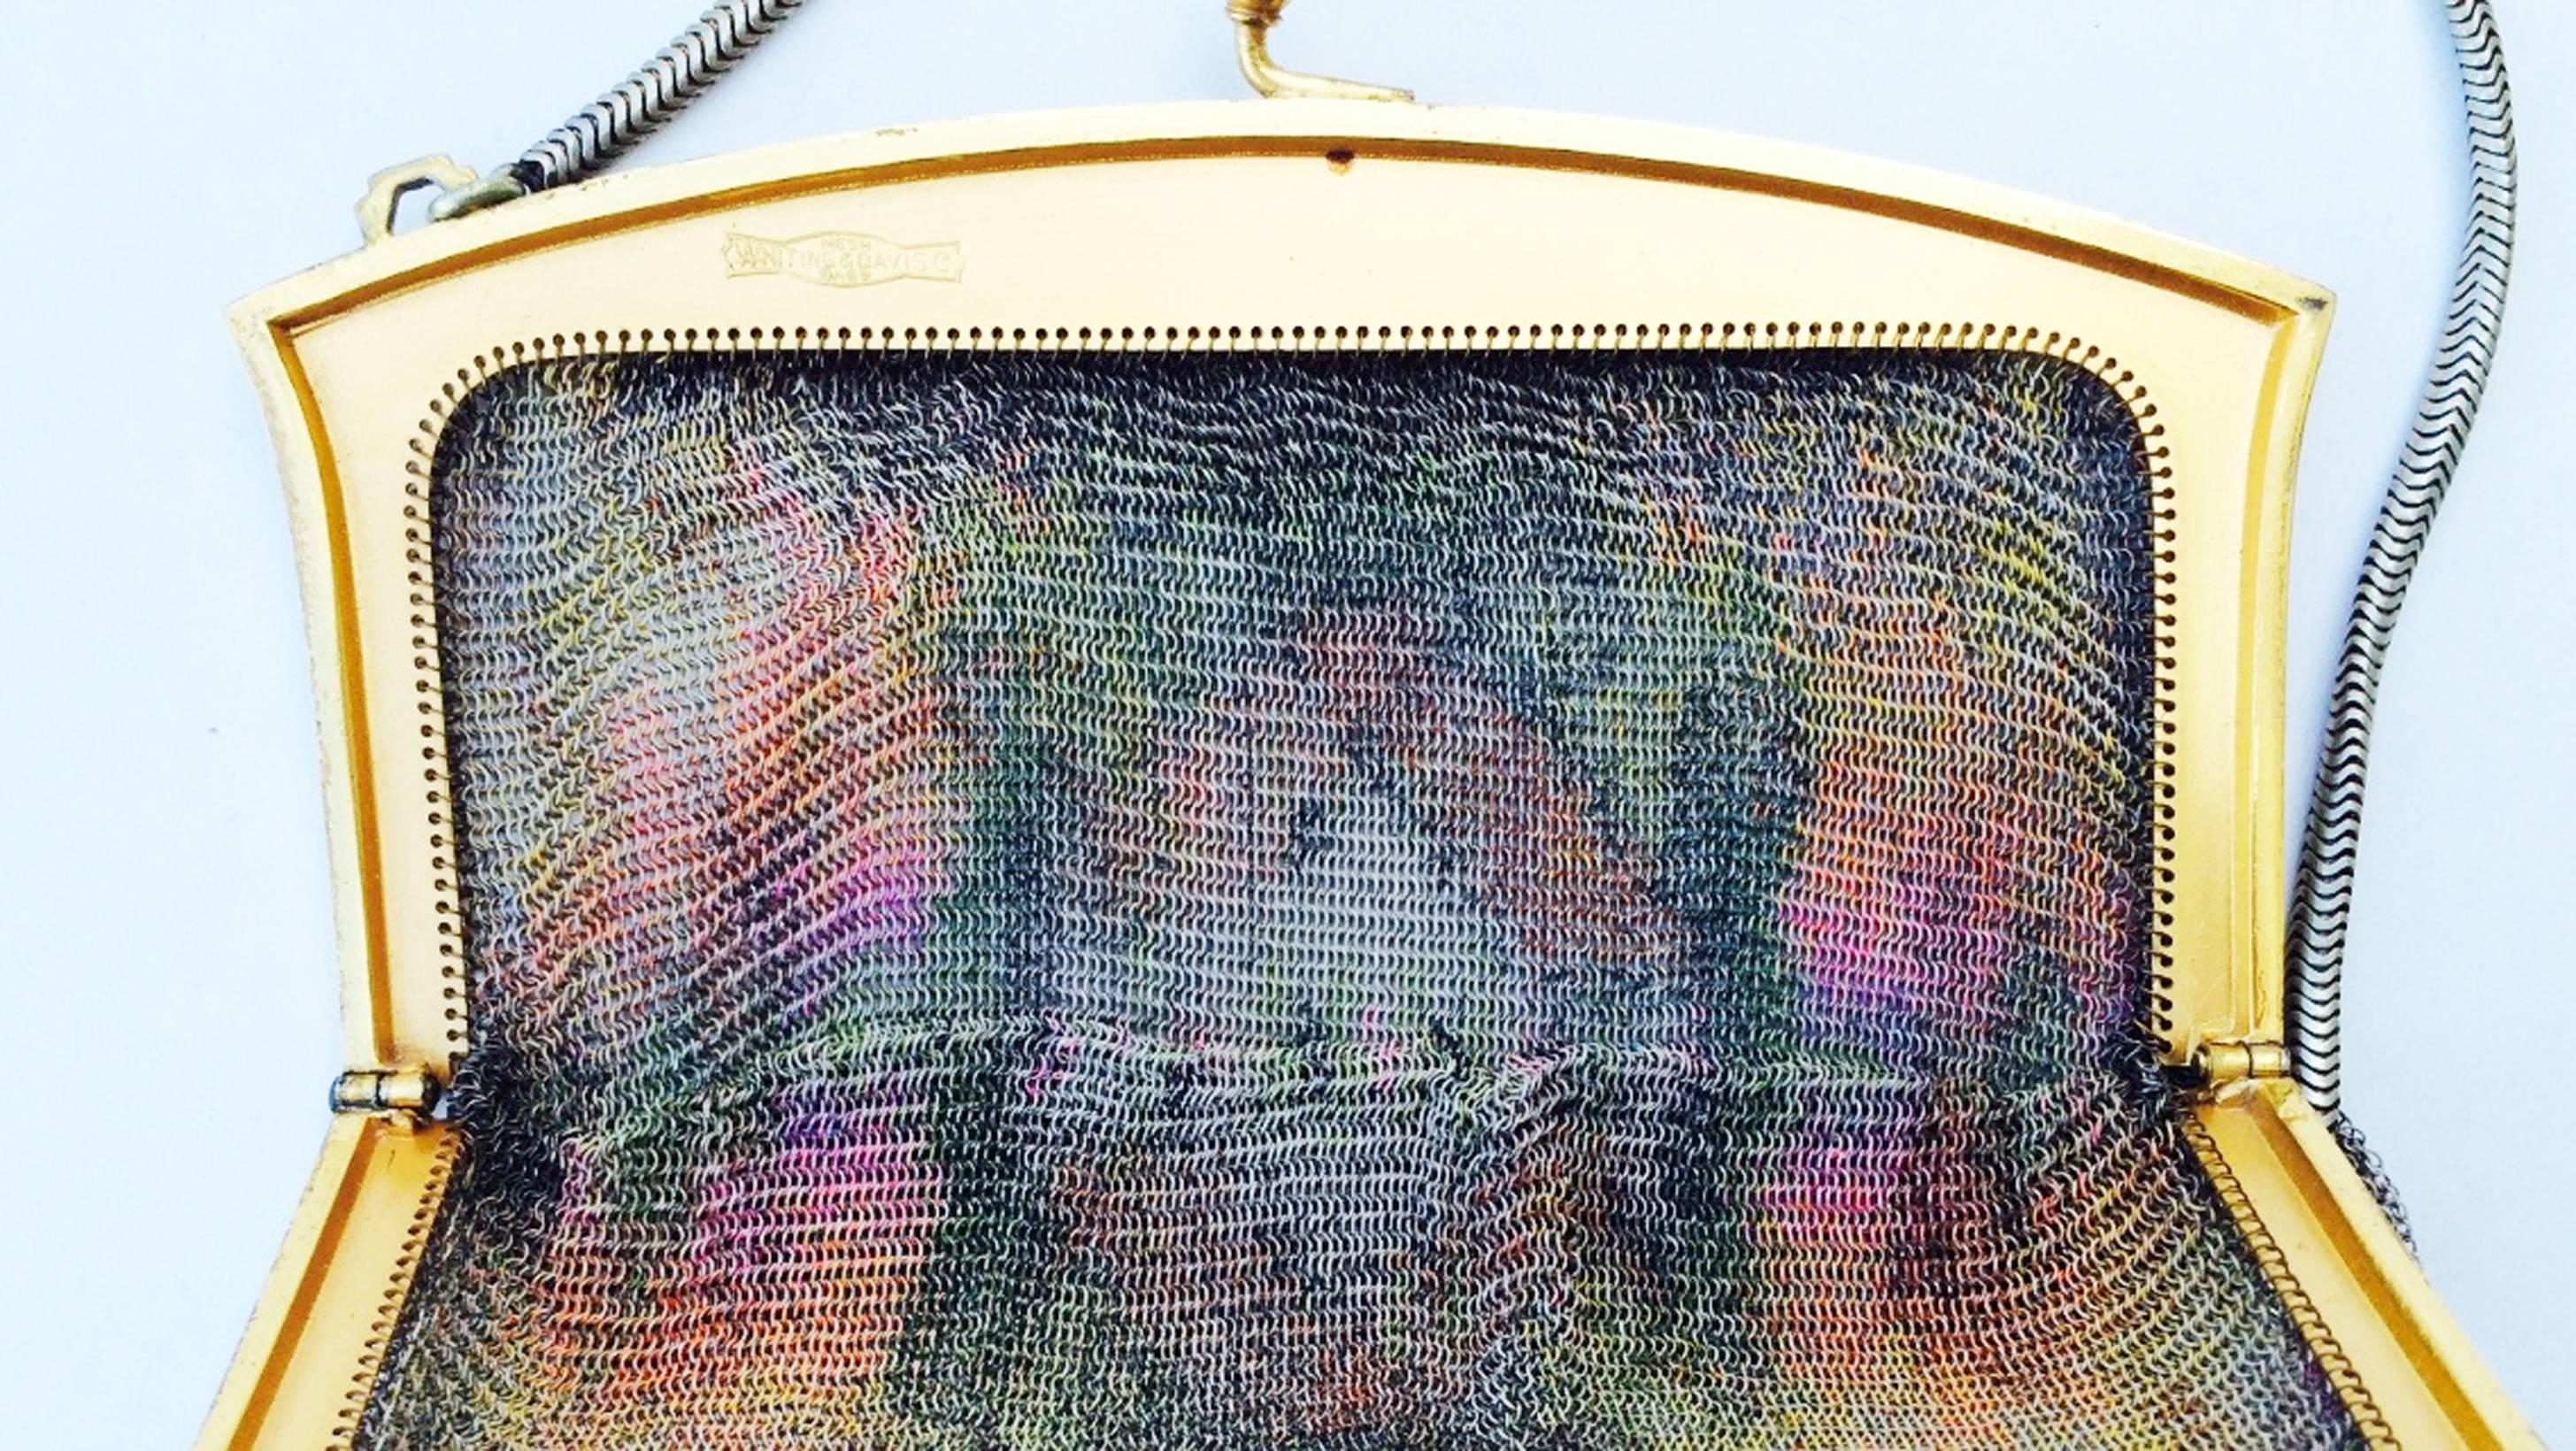 A fine and rare Paul Poiret Art Deco mesh hand bag. Authentic period Whiting & Davis item features a sculpted Art Deco gilt metal frame and hand painted 